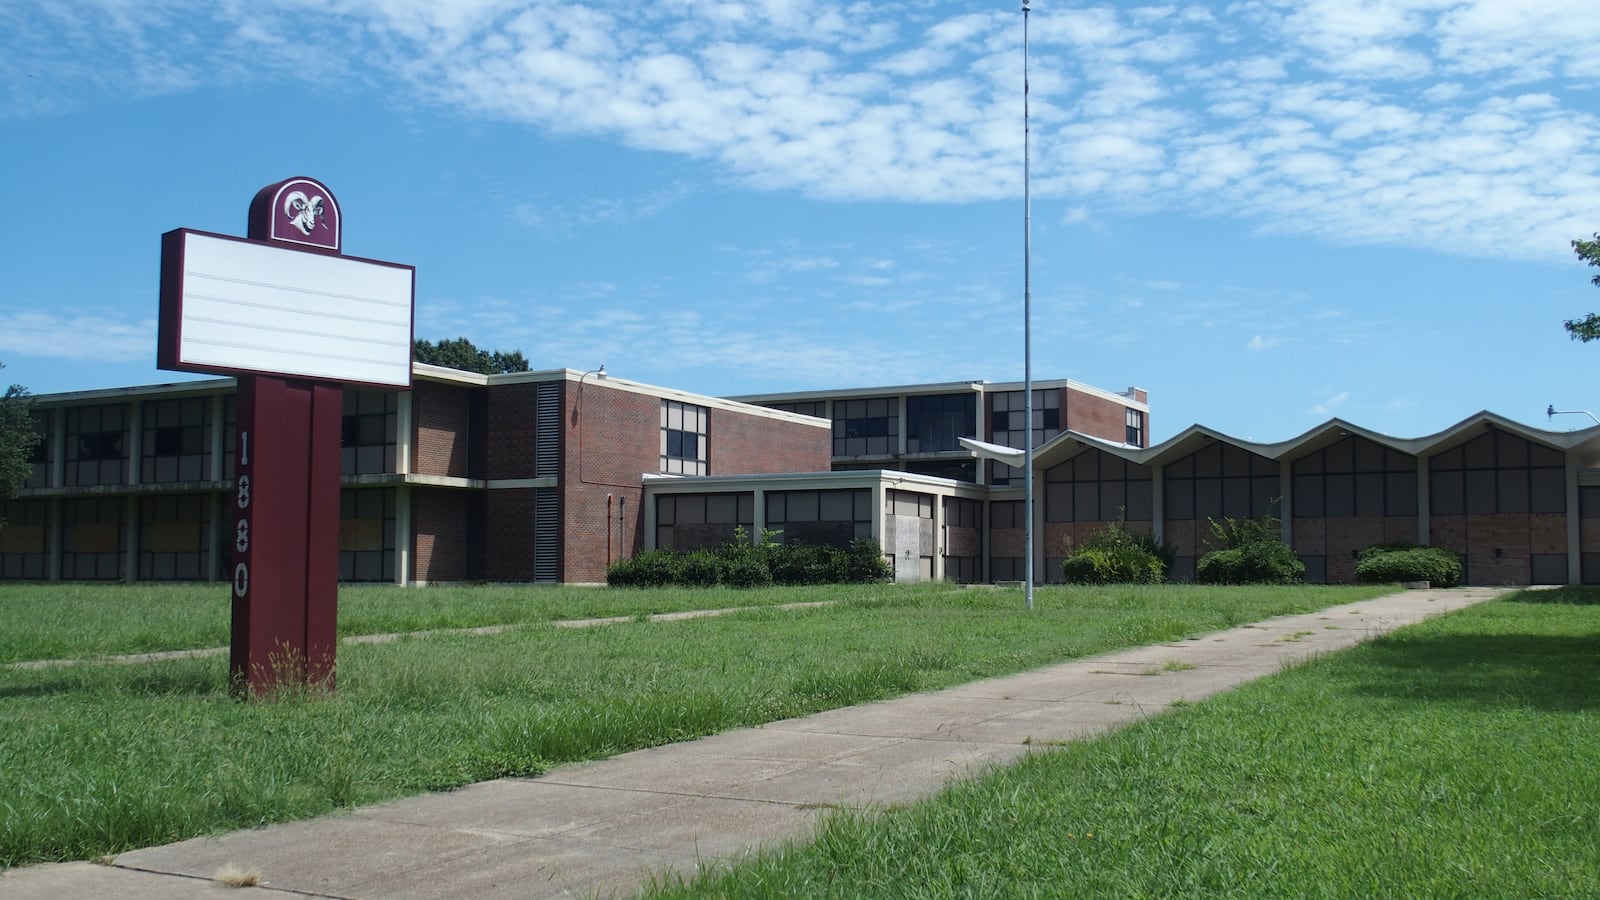 The South Memphis school was most recently the home of GRAD Academy, a charter school in the state-run Achievement School District before it closed in 2018.